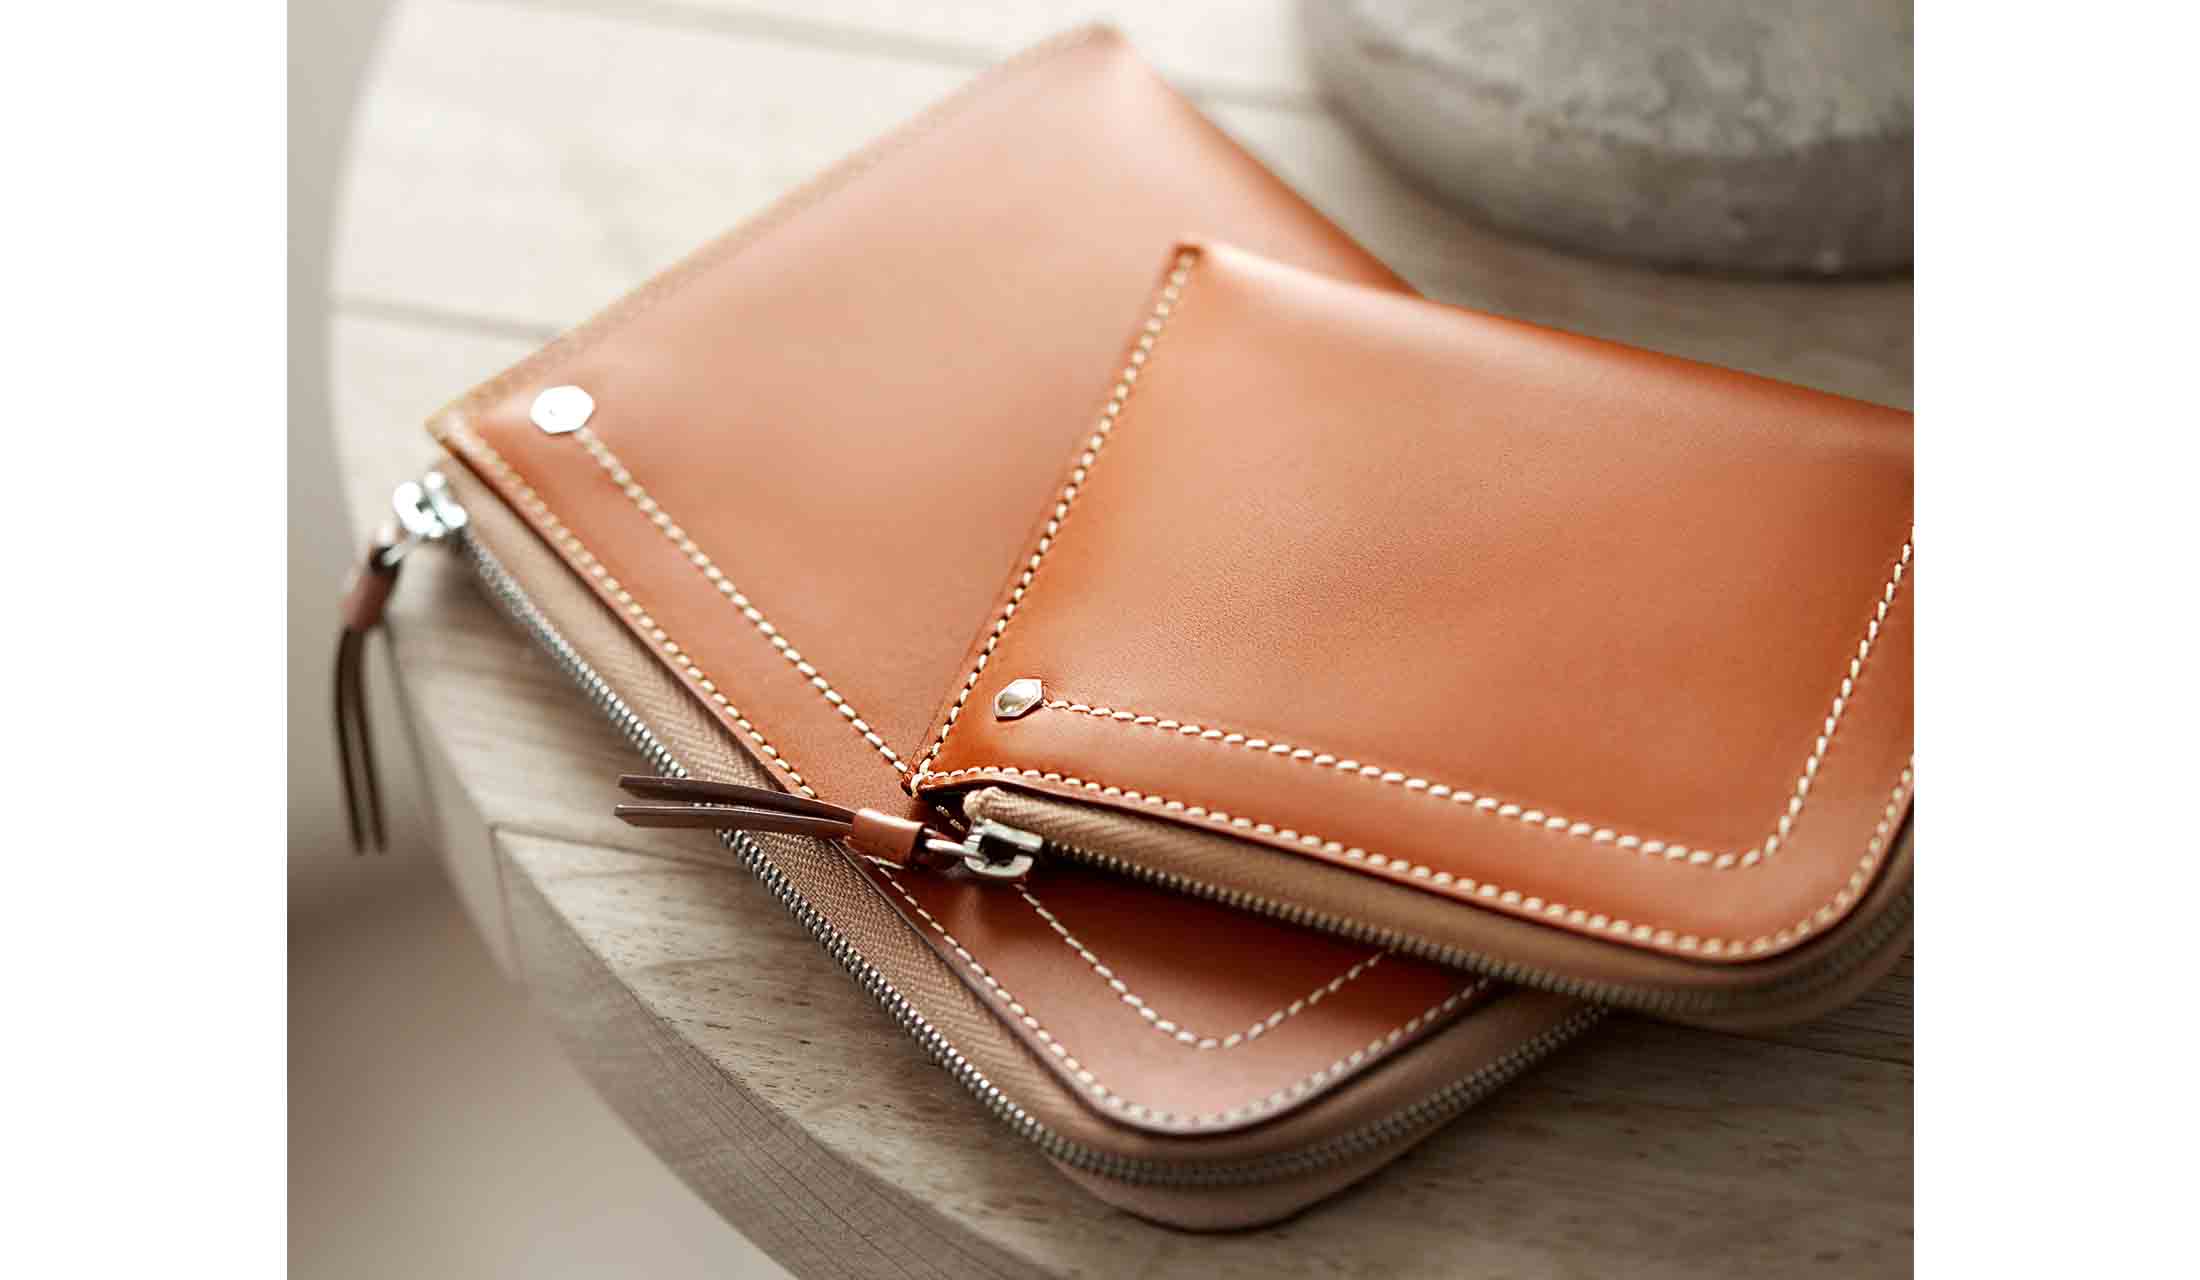 Best collection 2. Small Leather goods. Senior Leather goods кошельки. Small Leather goods m69980. Leather goods tak1.